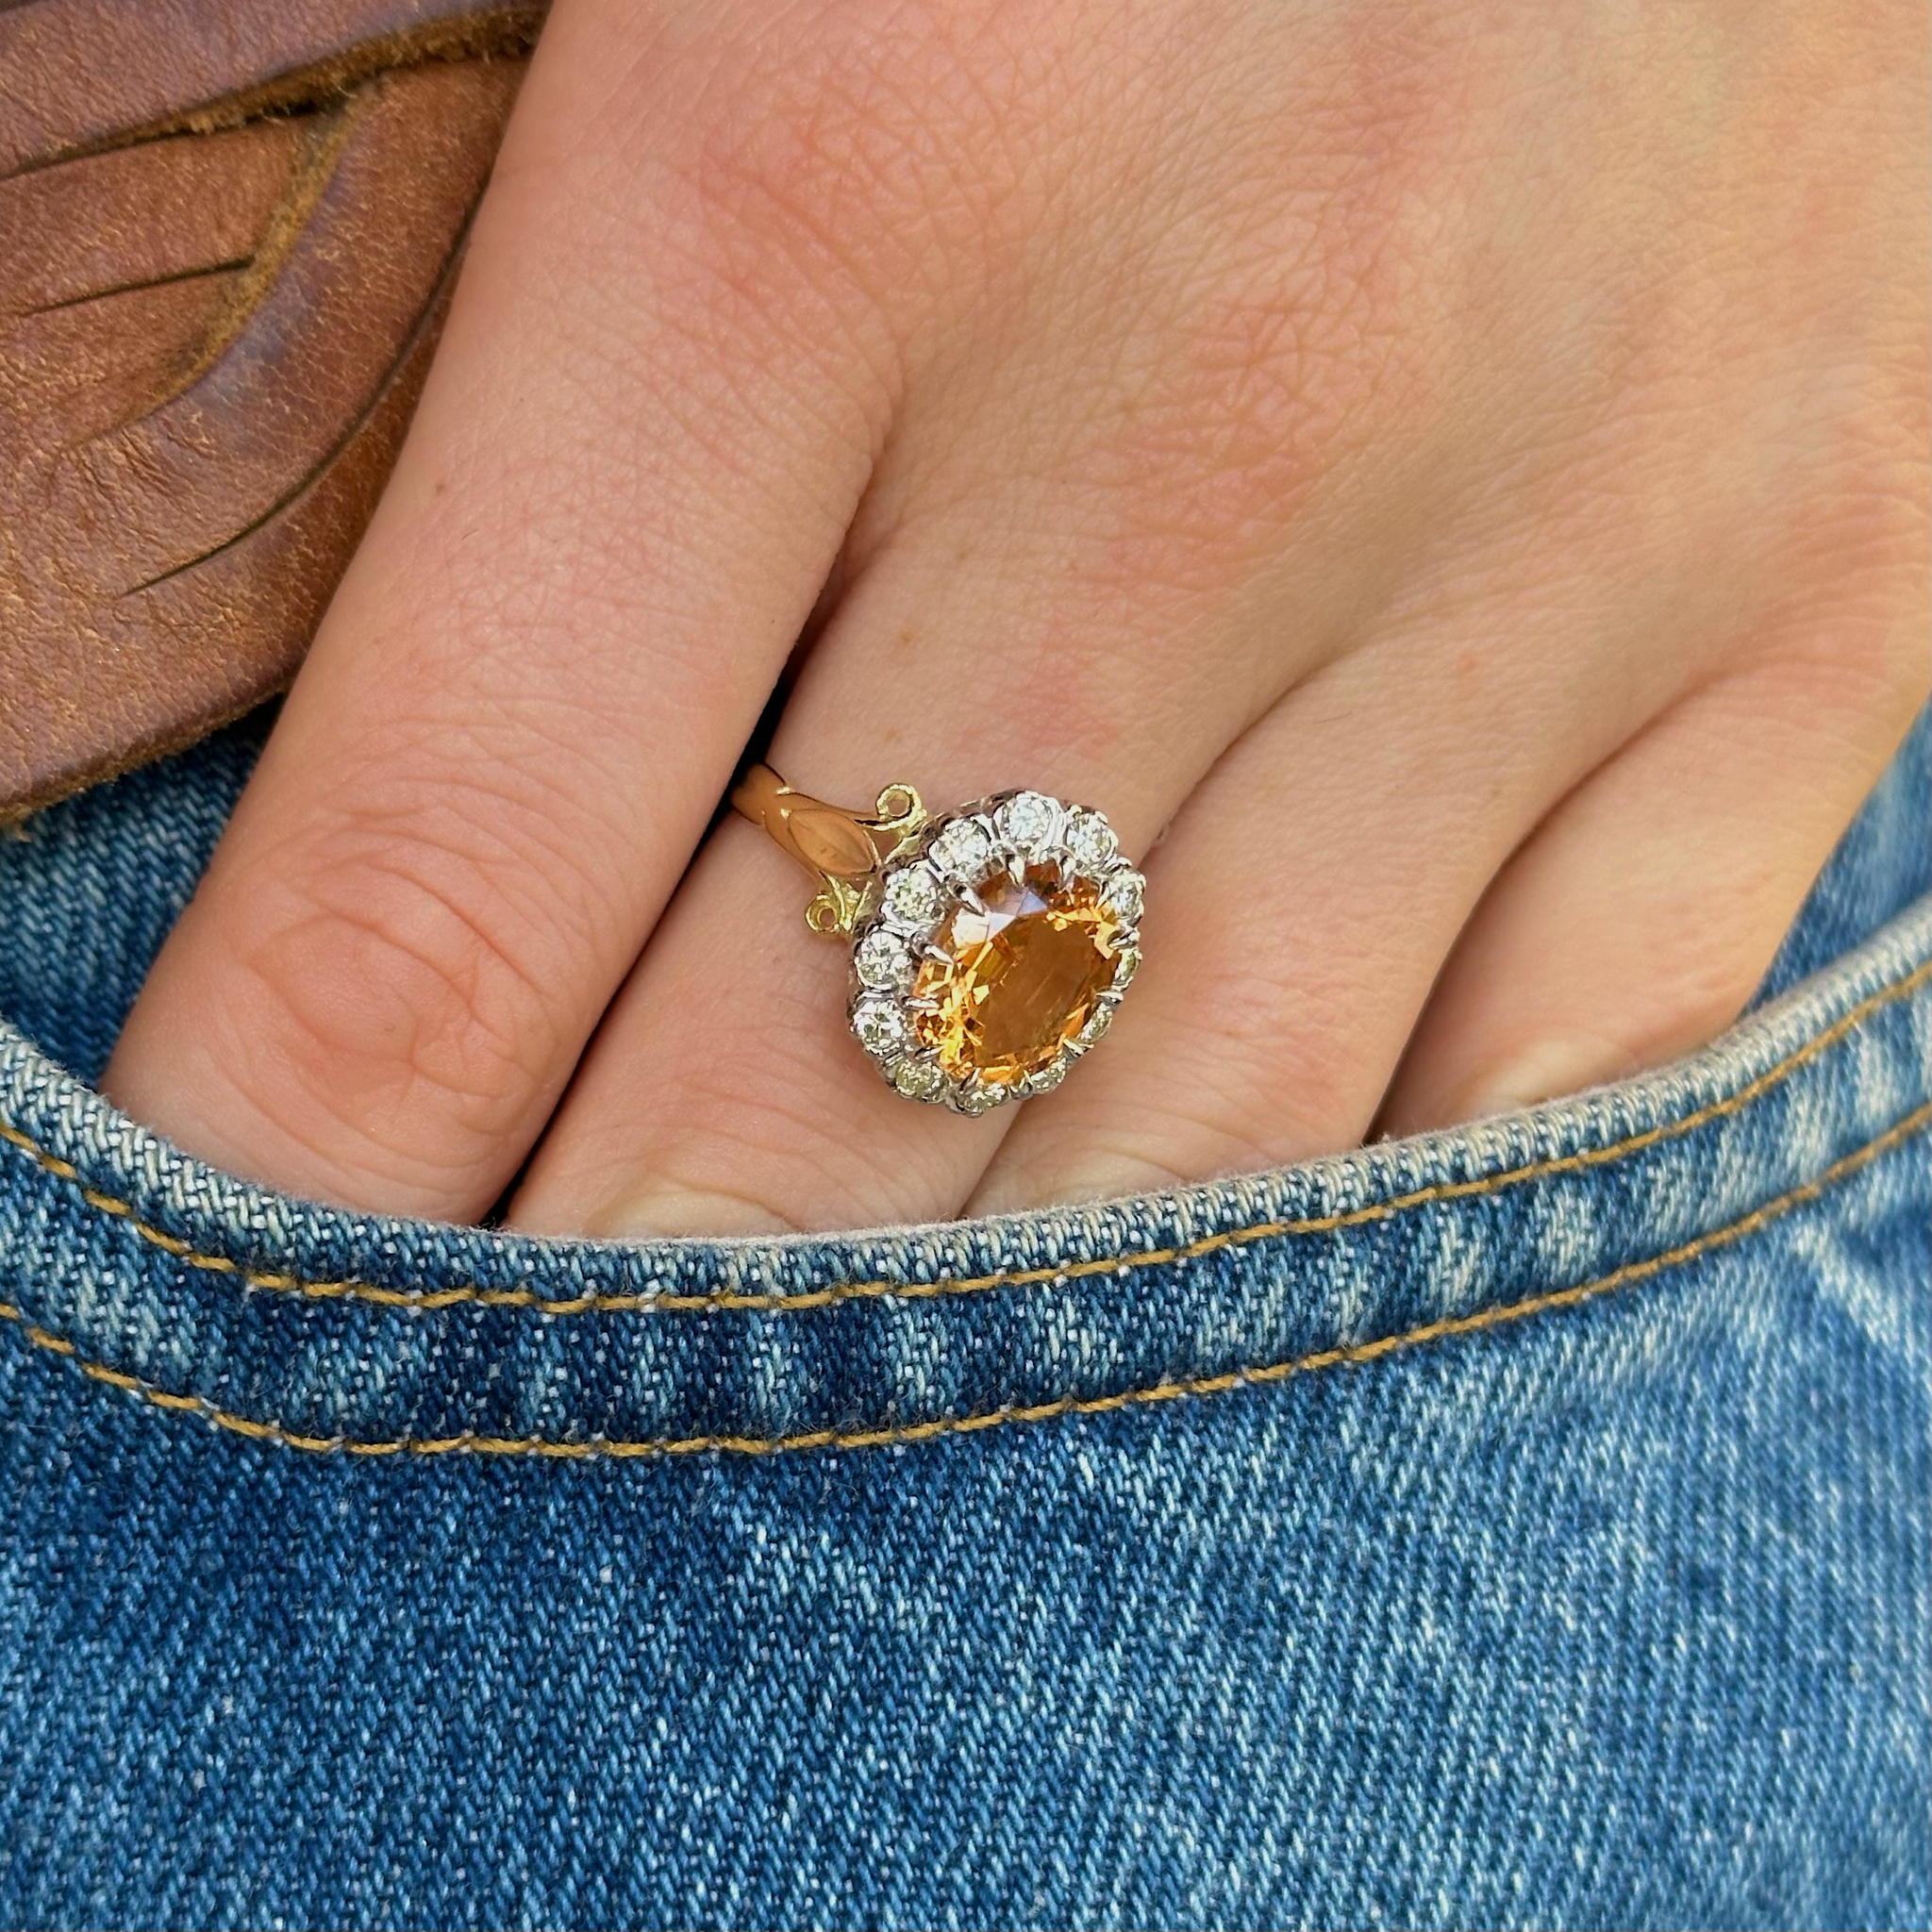 Antique, Victorian Topaz and Diamond Cluster Ring, 18ct Yellow Gold worn on hand in pocket of jeans